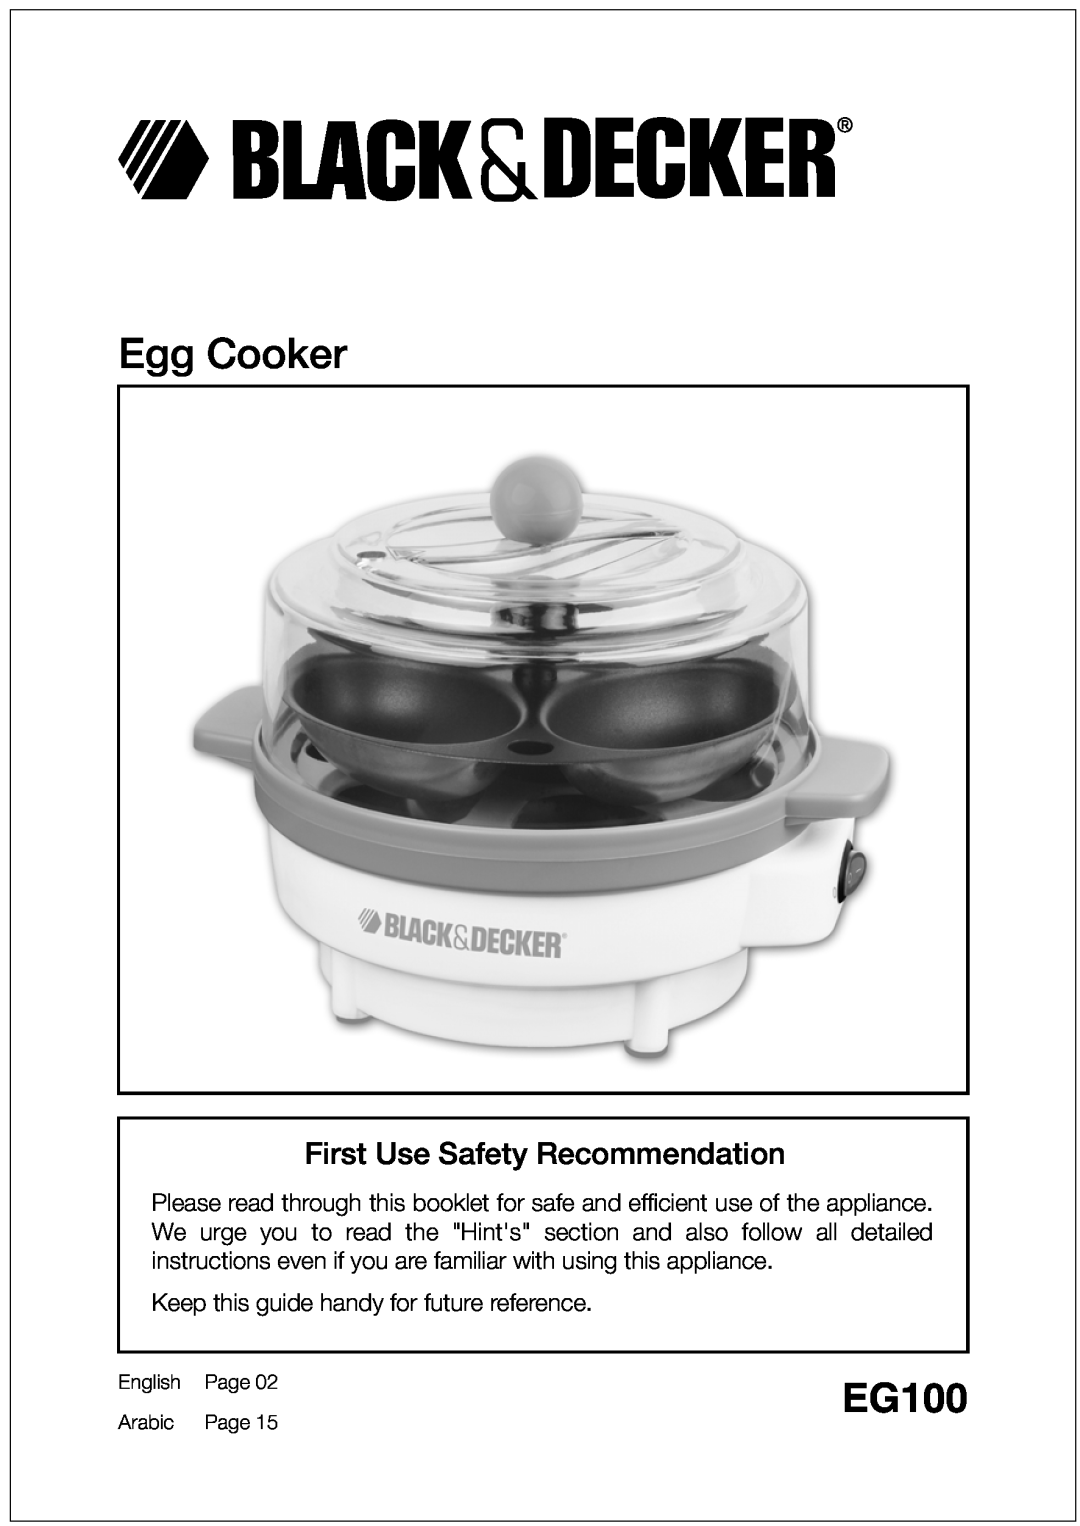 Black & Decker EG100 manual First Use Safety Recommendation, Egg Cooker, Keep this guide handy for future reference 